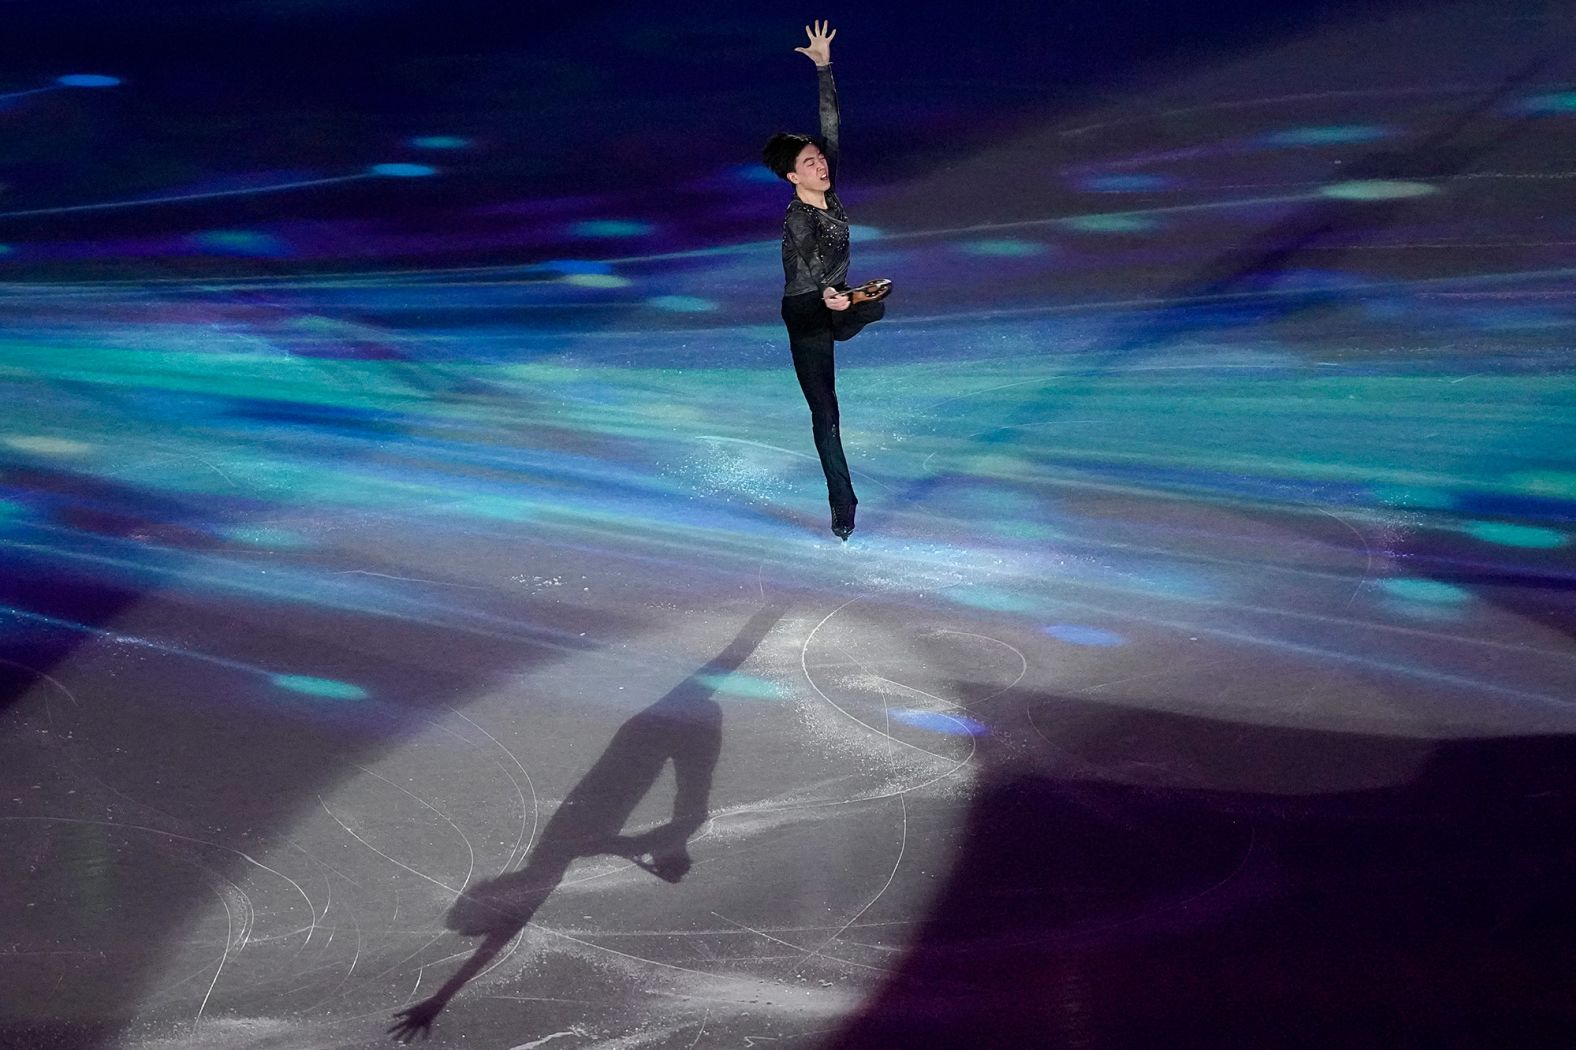 American Vincent Zhou performs during the figure skating gala on February 20. Zhou was unable to compete in the men's singles event after <a href="index.php?page=&url=https%3A%2F%2Fwww.cnn.com%2Fworld%2Flive-news%2Fbeijing-winter-olympics-02-07-22-spt%2Fh_9b5ad930d4d5f40433c3e0e86fee98a0" target="_blank">testing positive for Covid-19, </a>and he spent much of the Olympics in quarantine.